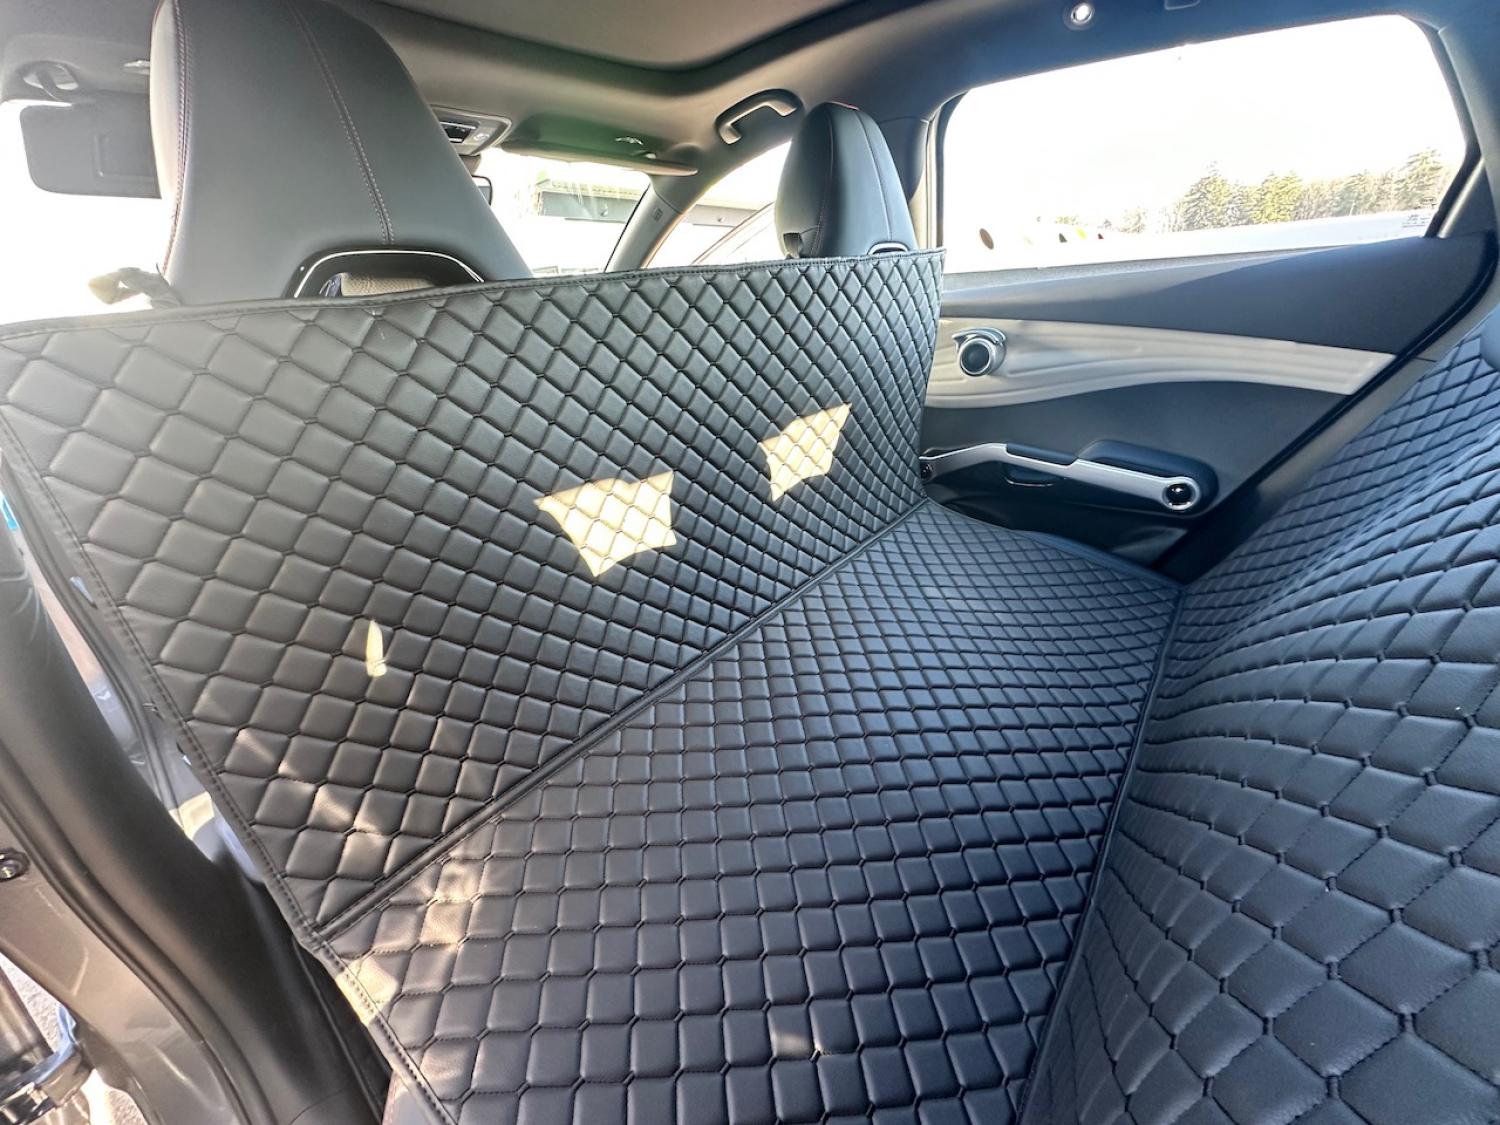 CARSTYLER® Back Seat Cover Geeignet Für Audi A5 8T Cabriolet 2009-2016